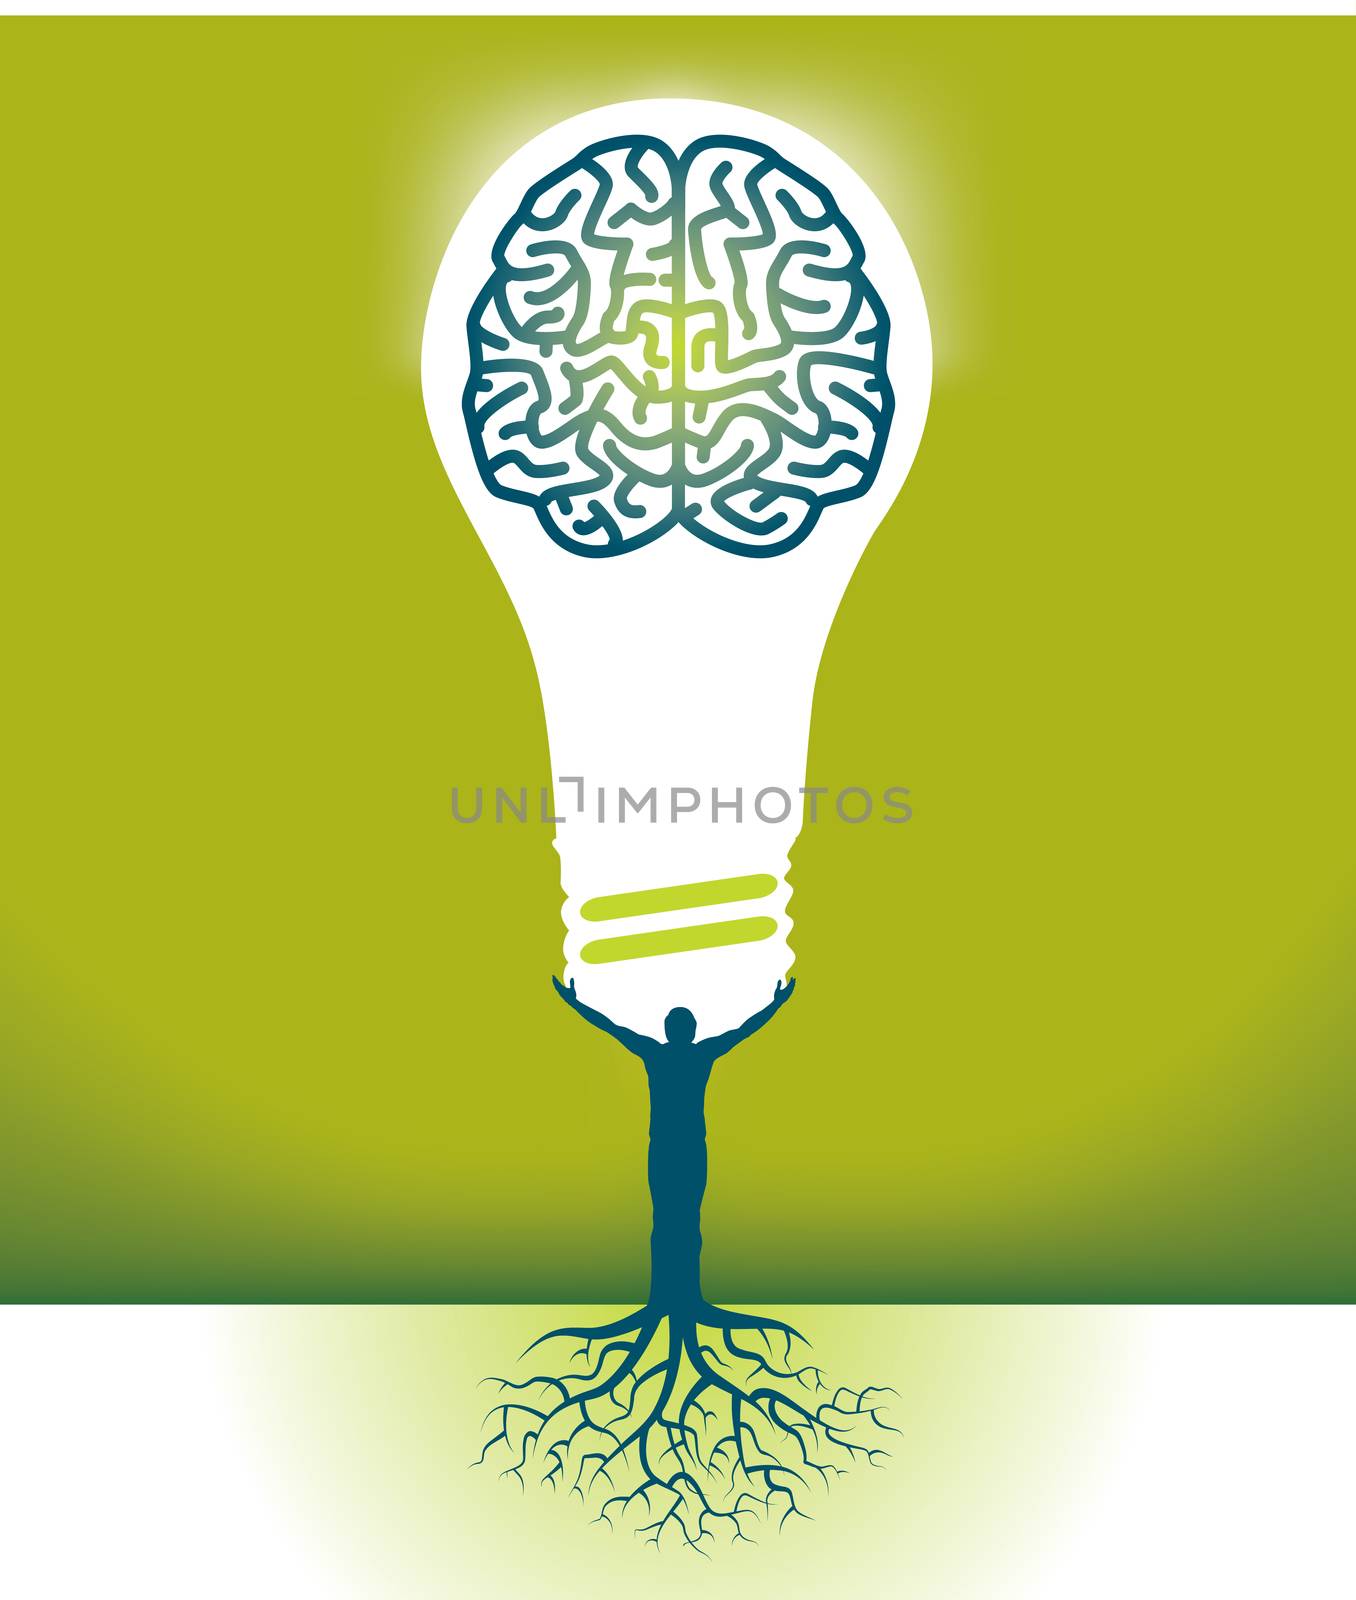 Abstract Vector Man-Brain-Bulb Background for Print or Web